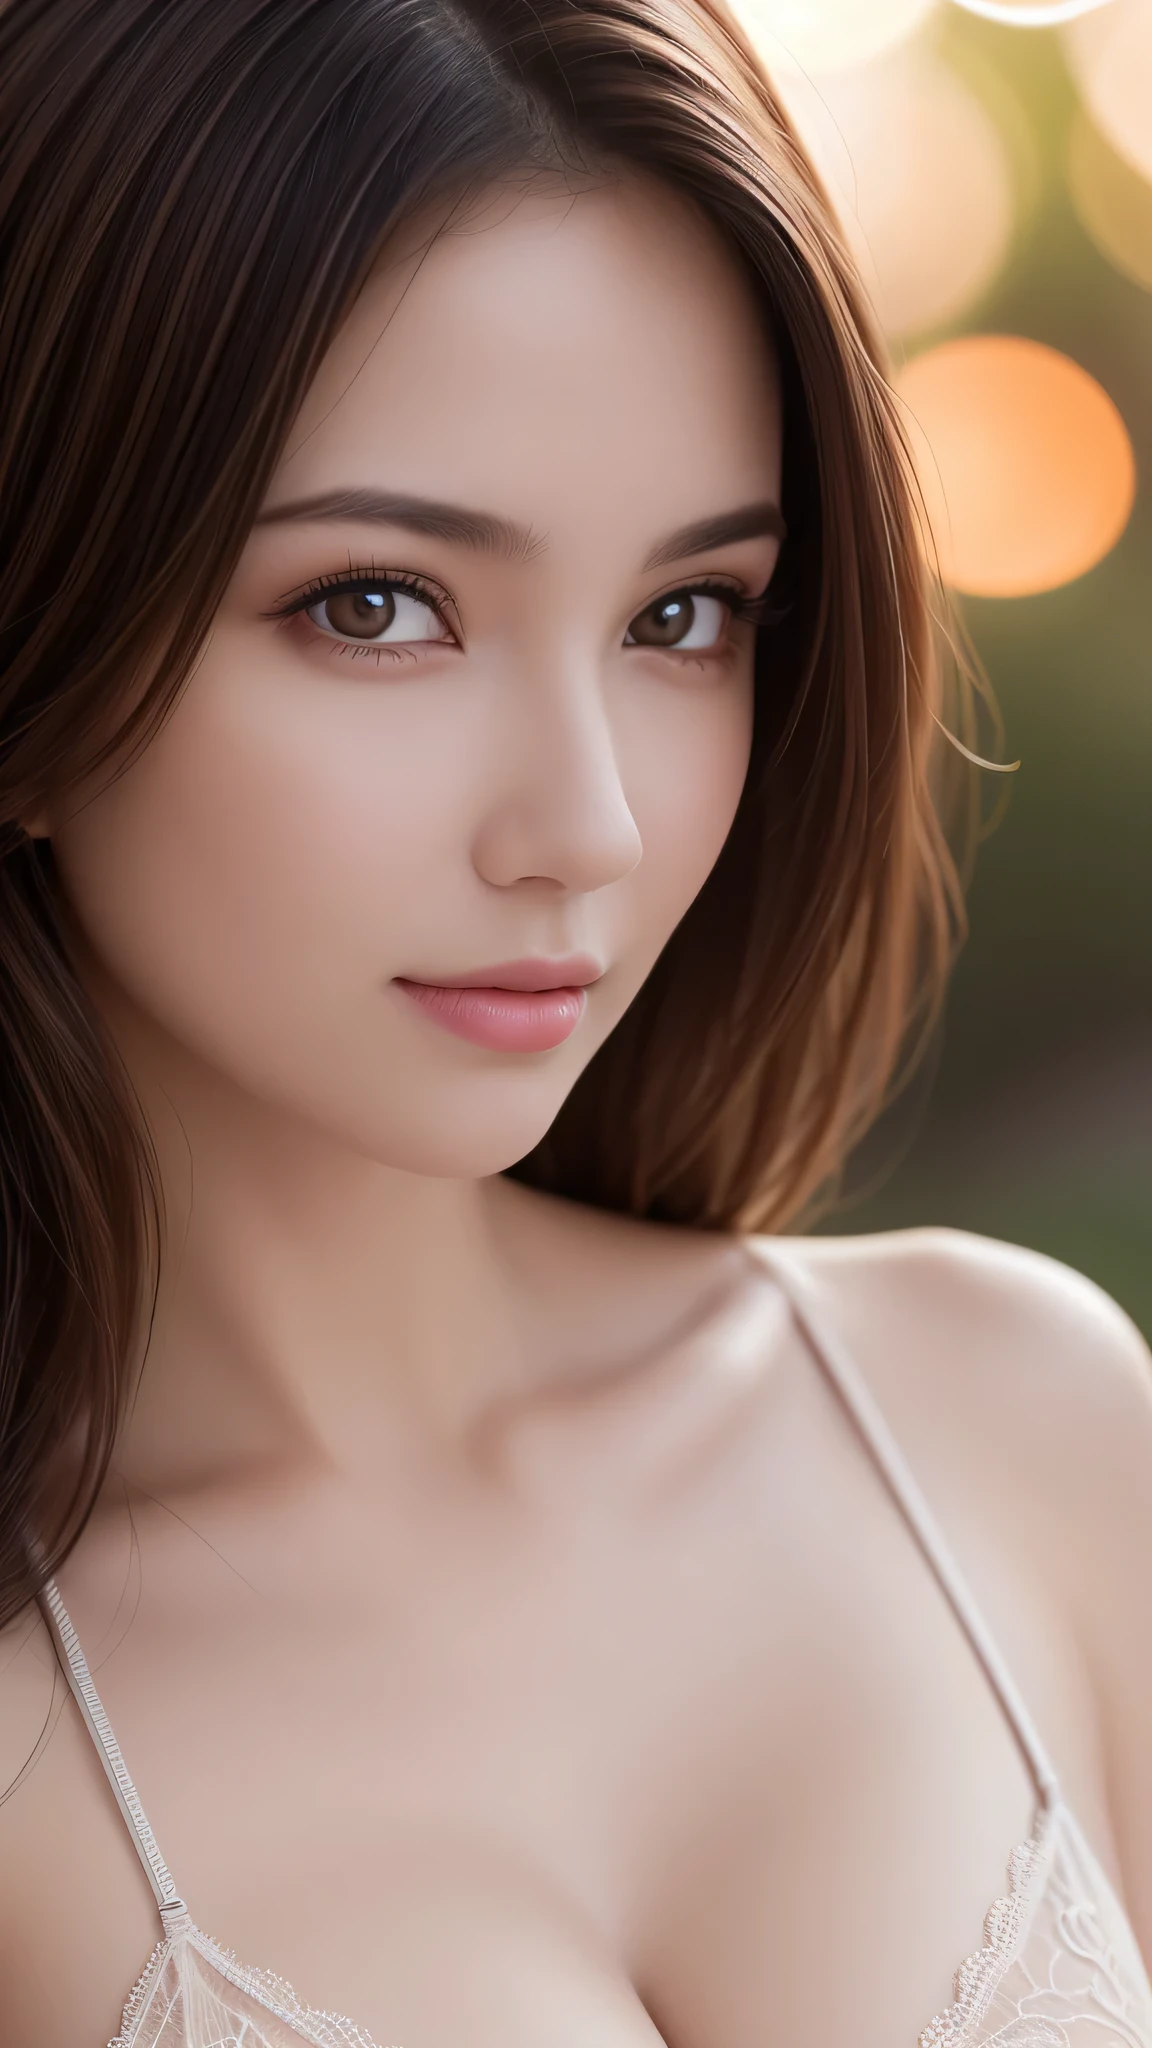 1 girl, (highest quality:1.4), (super detailed), (detailed light), (Highly detailed beautiful face), wonderful face and eyes, brown hair, brown eyes, Beautiful sheer lace details, beautiful breasts, nipple, Highly detailed CG integrated 8k wallpaper, High resolution raw color photos, professional photos, dynamic lighting, (((Bokeh))), Depth of bounds written,